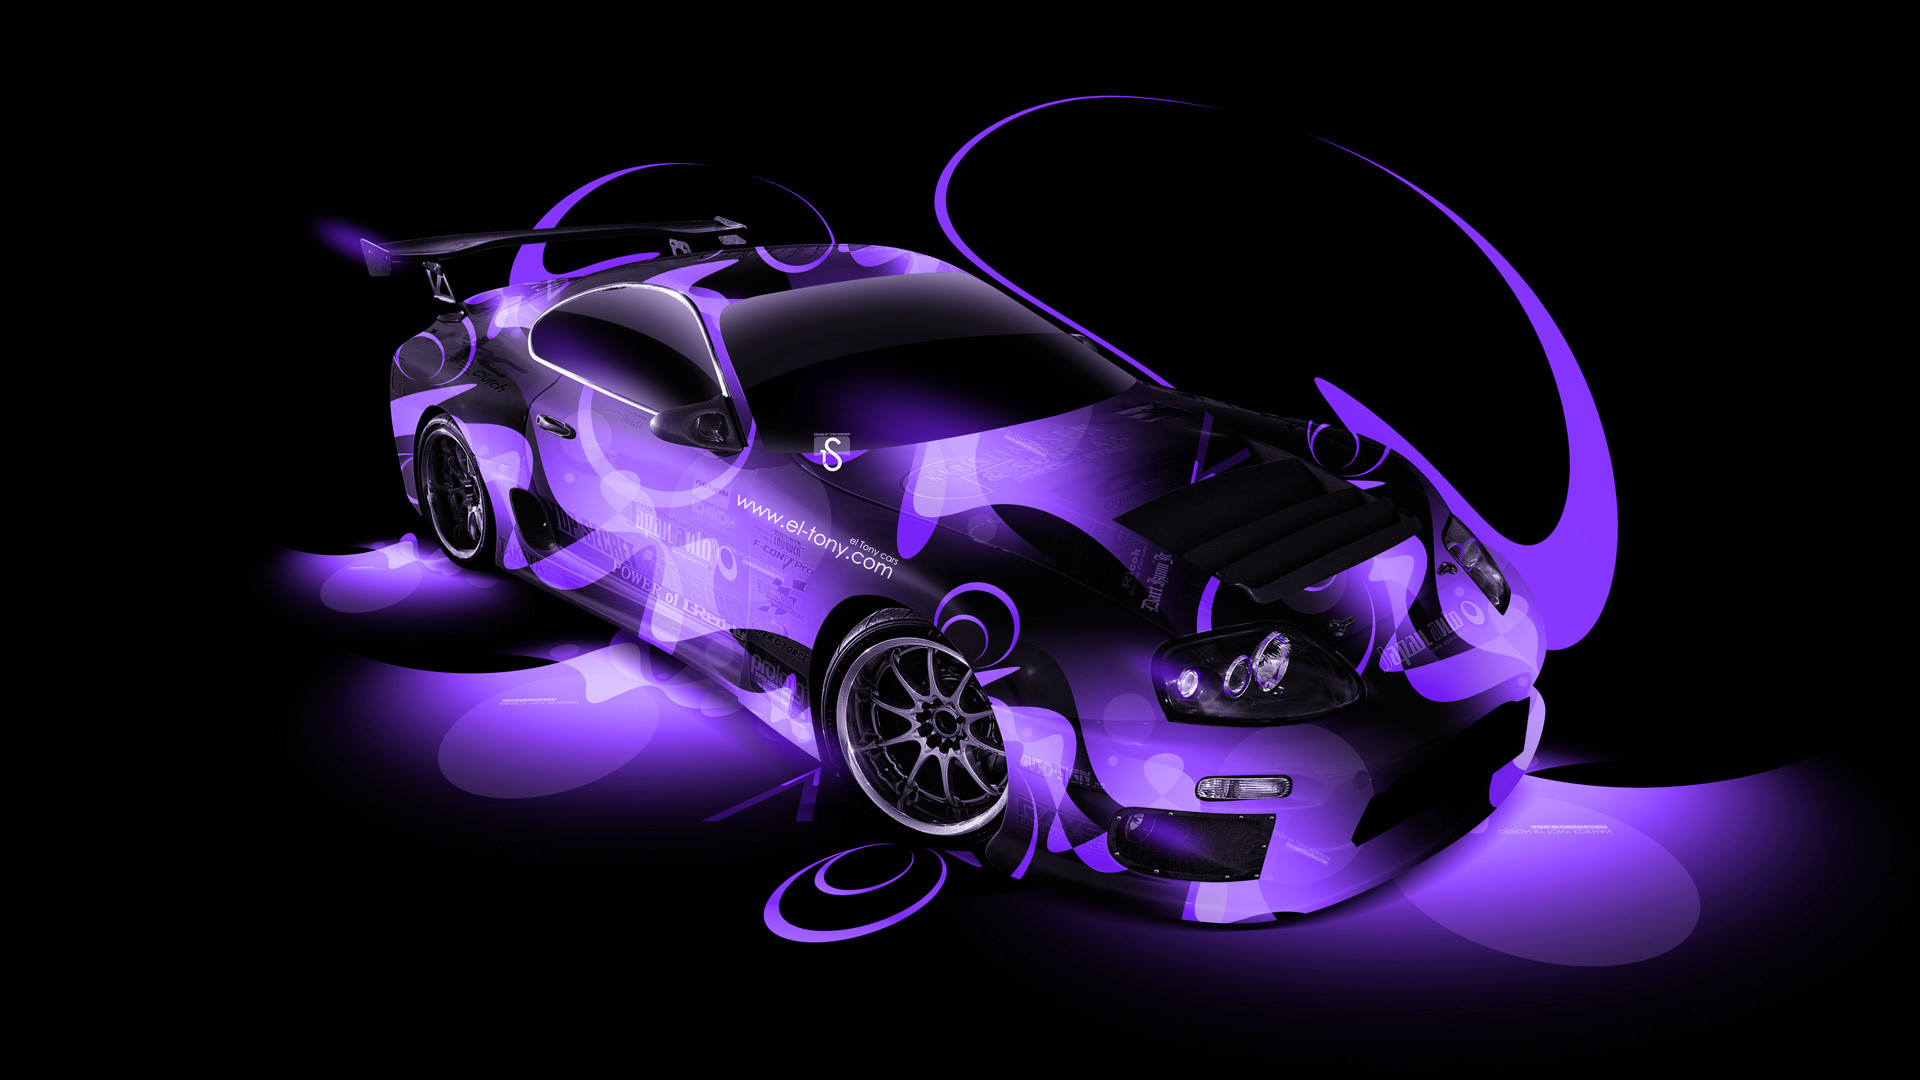 1920x1080 Toyota-Supra-Tuning-JDM-Super-Abstract-Car-Violet-